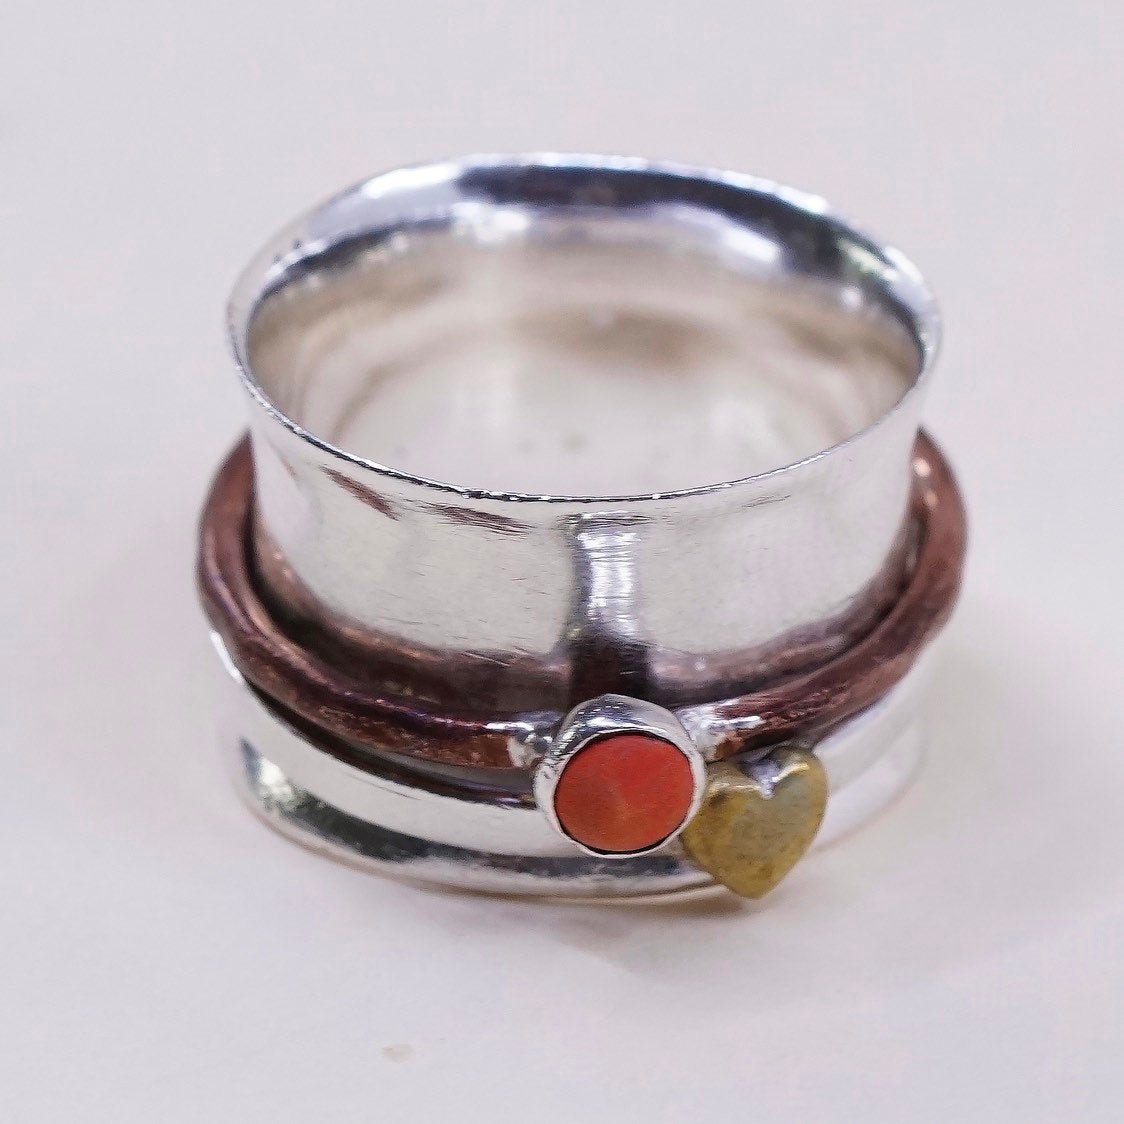 sz 6, vtg two Tone Sterling 925 silver Handmade spinner ring, band w/ coral